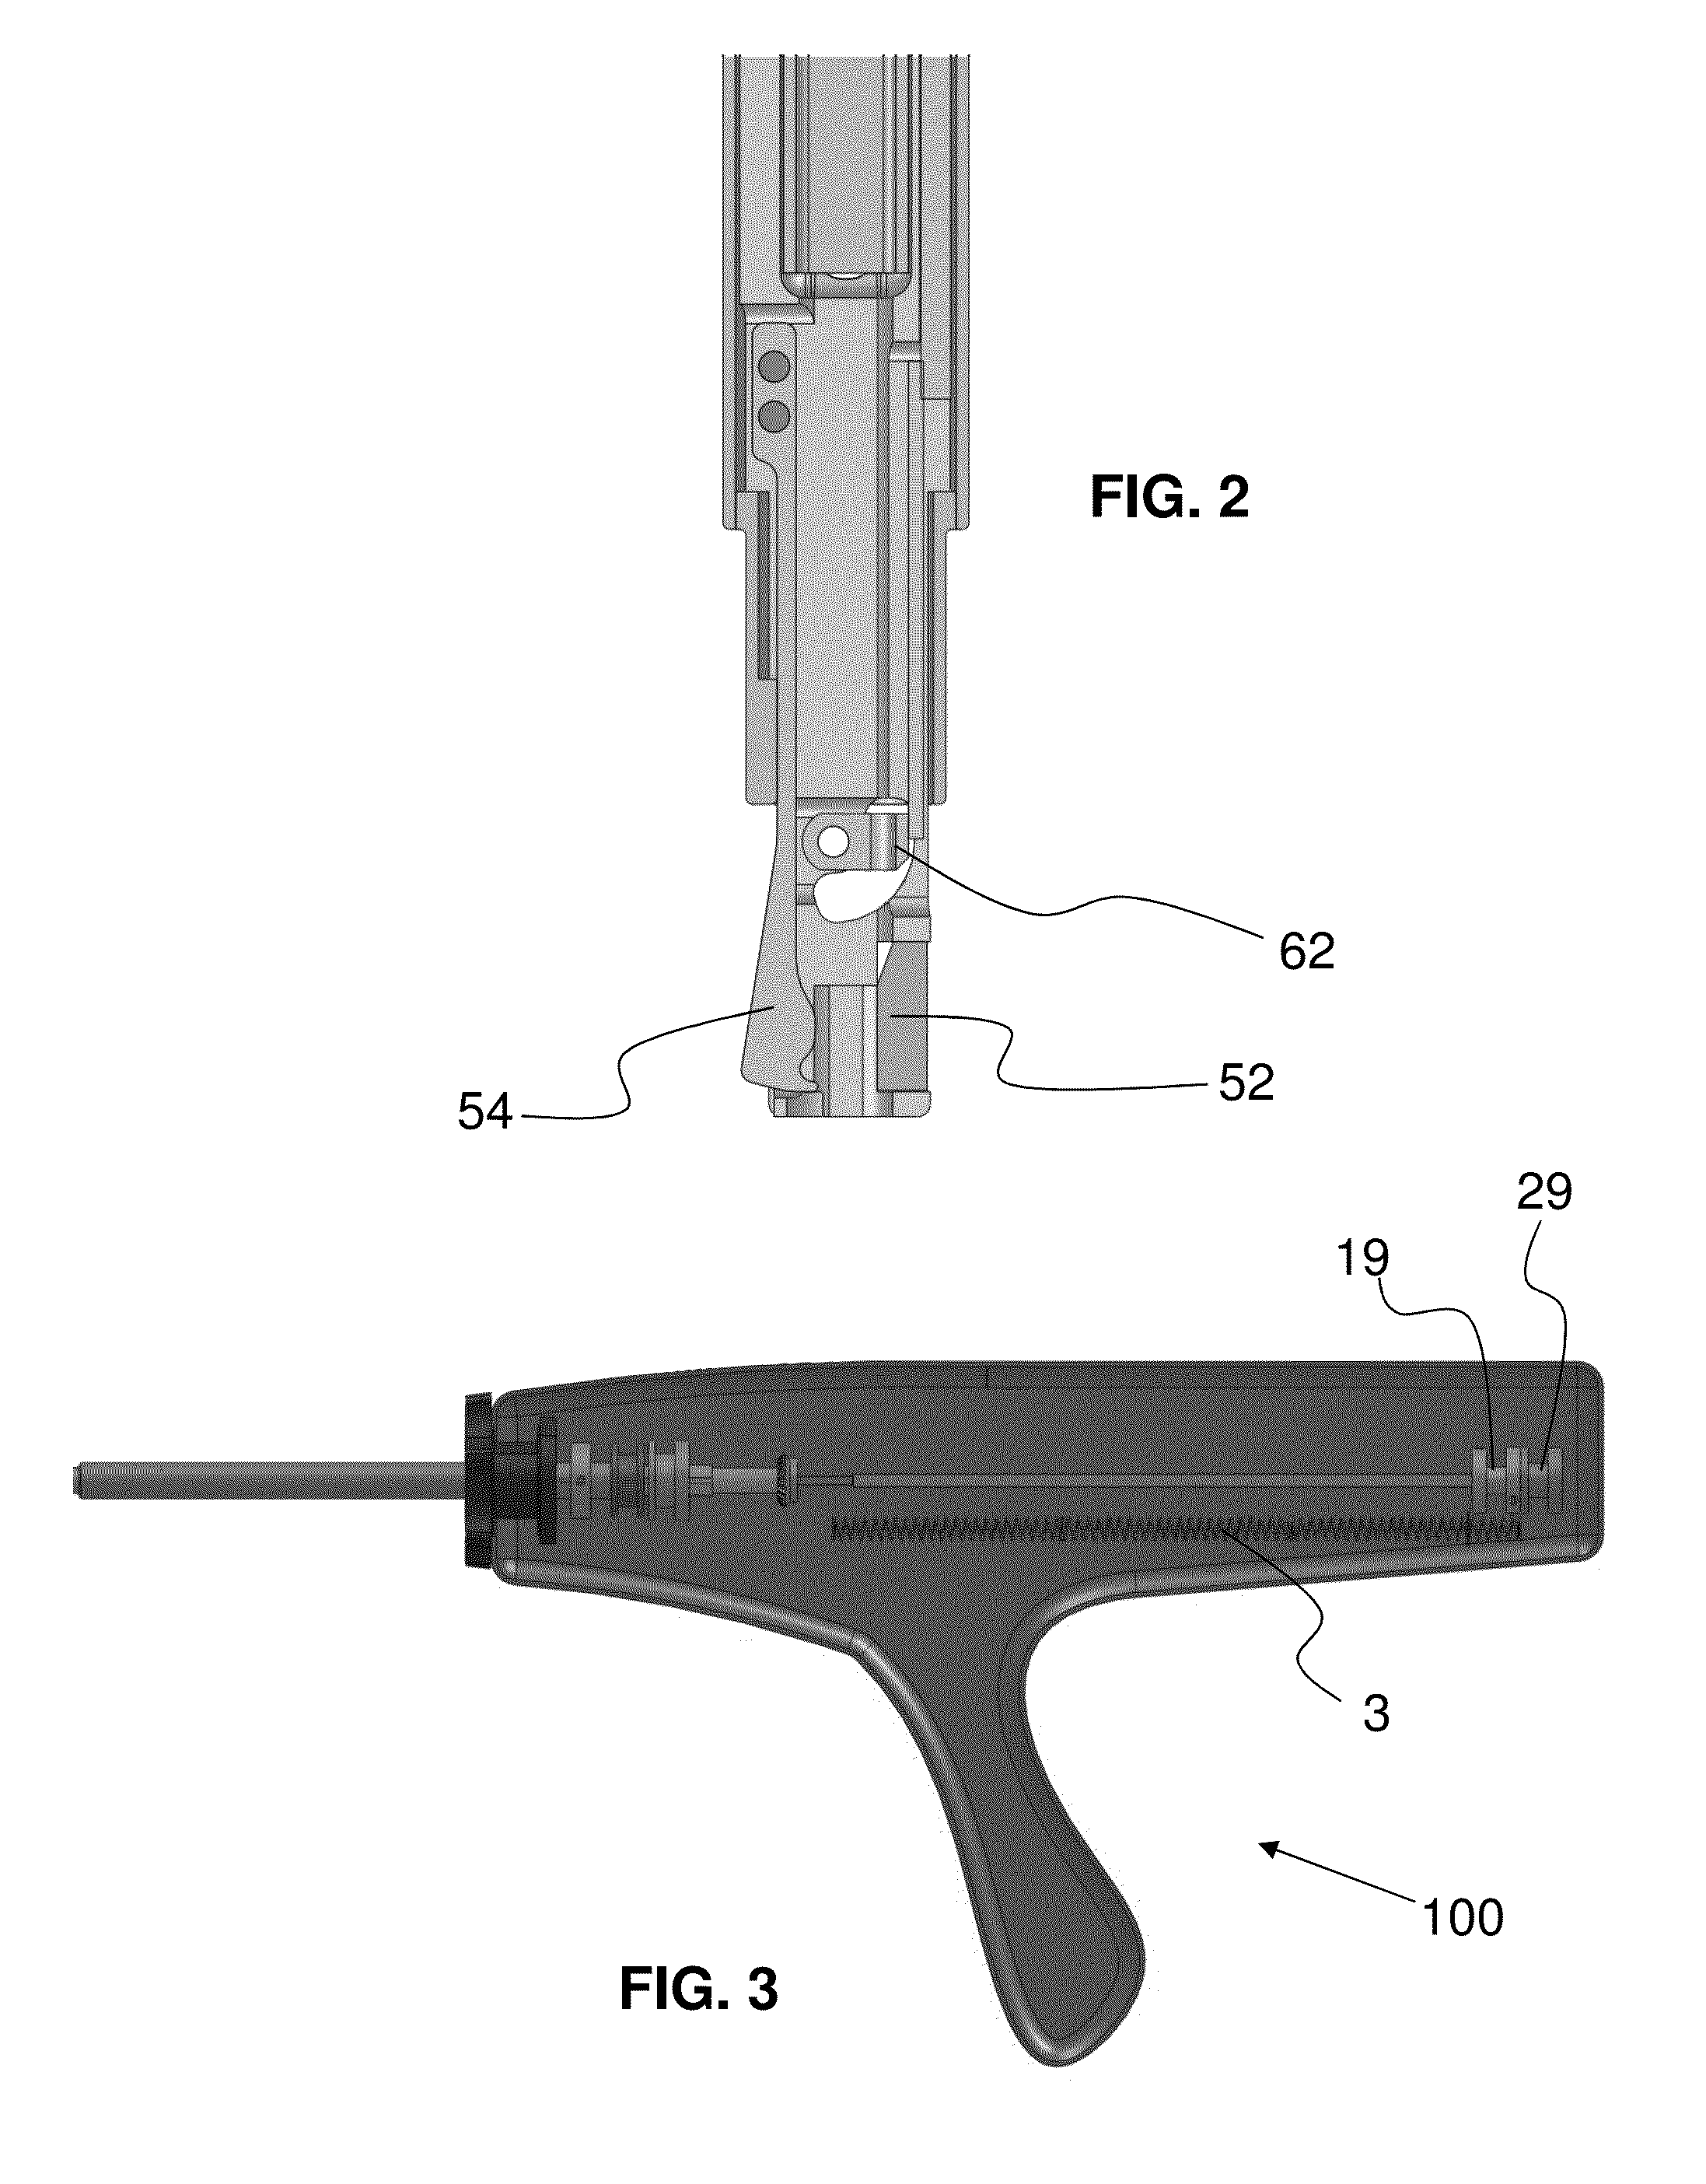 Multiple-firing securing device and methods for using and manufacturing same